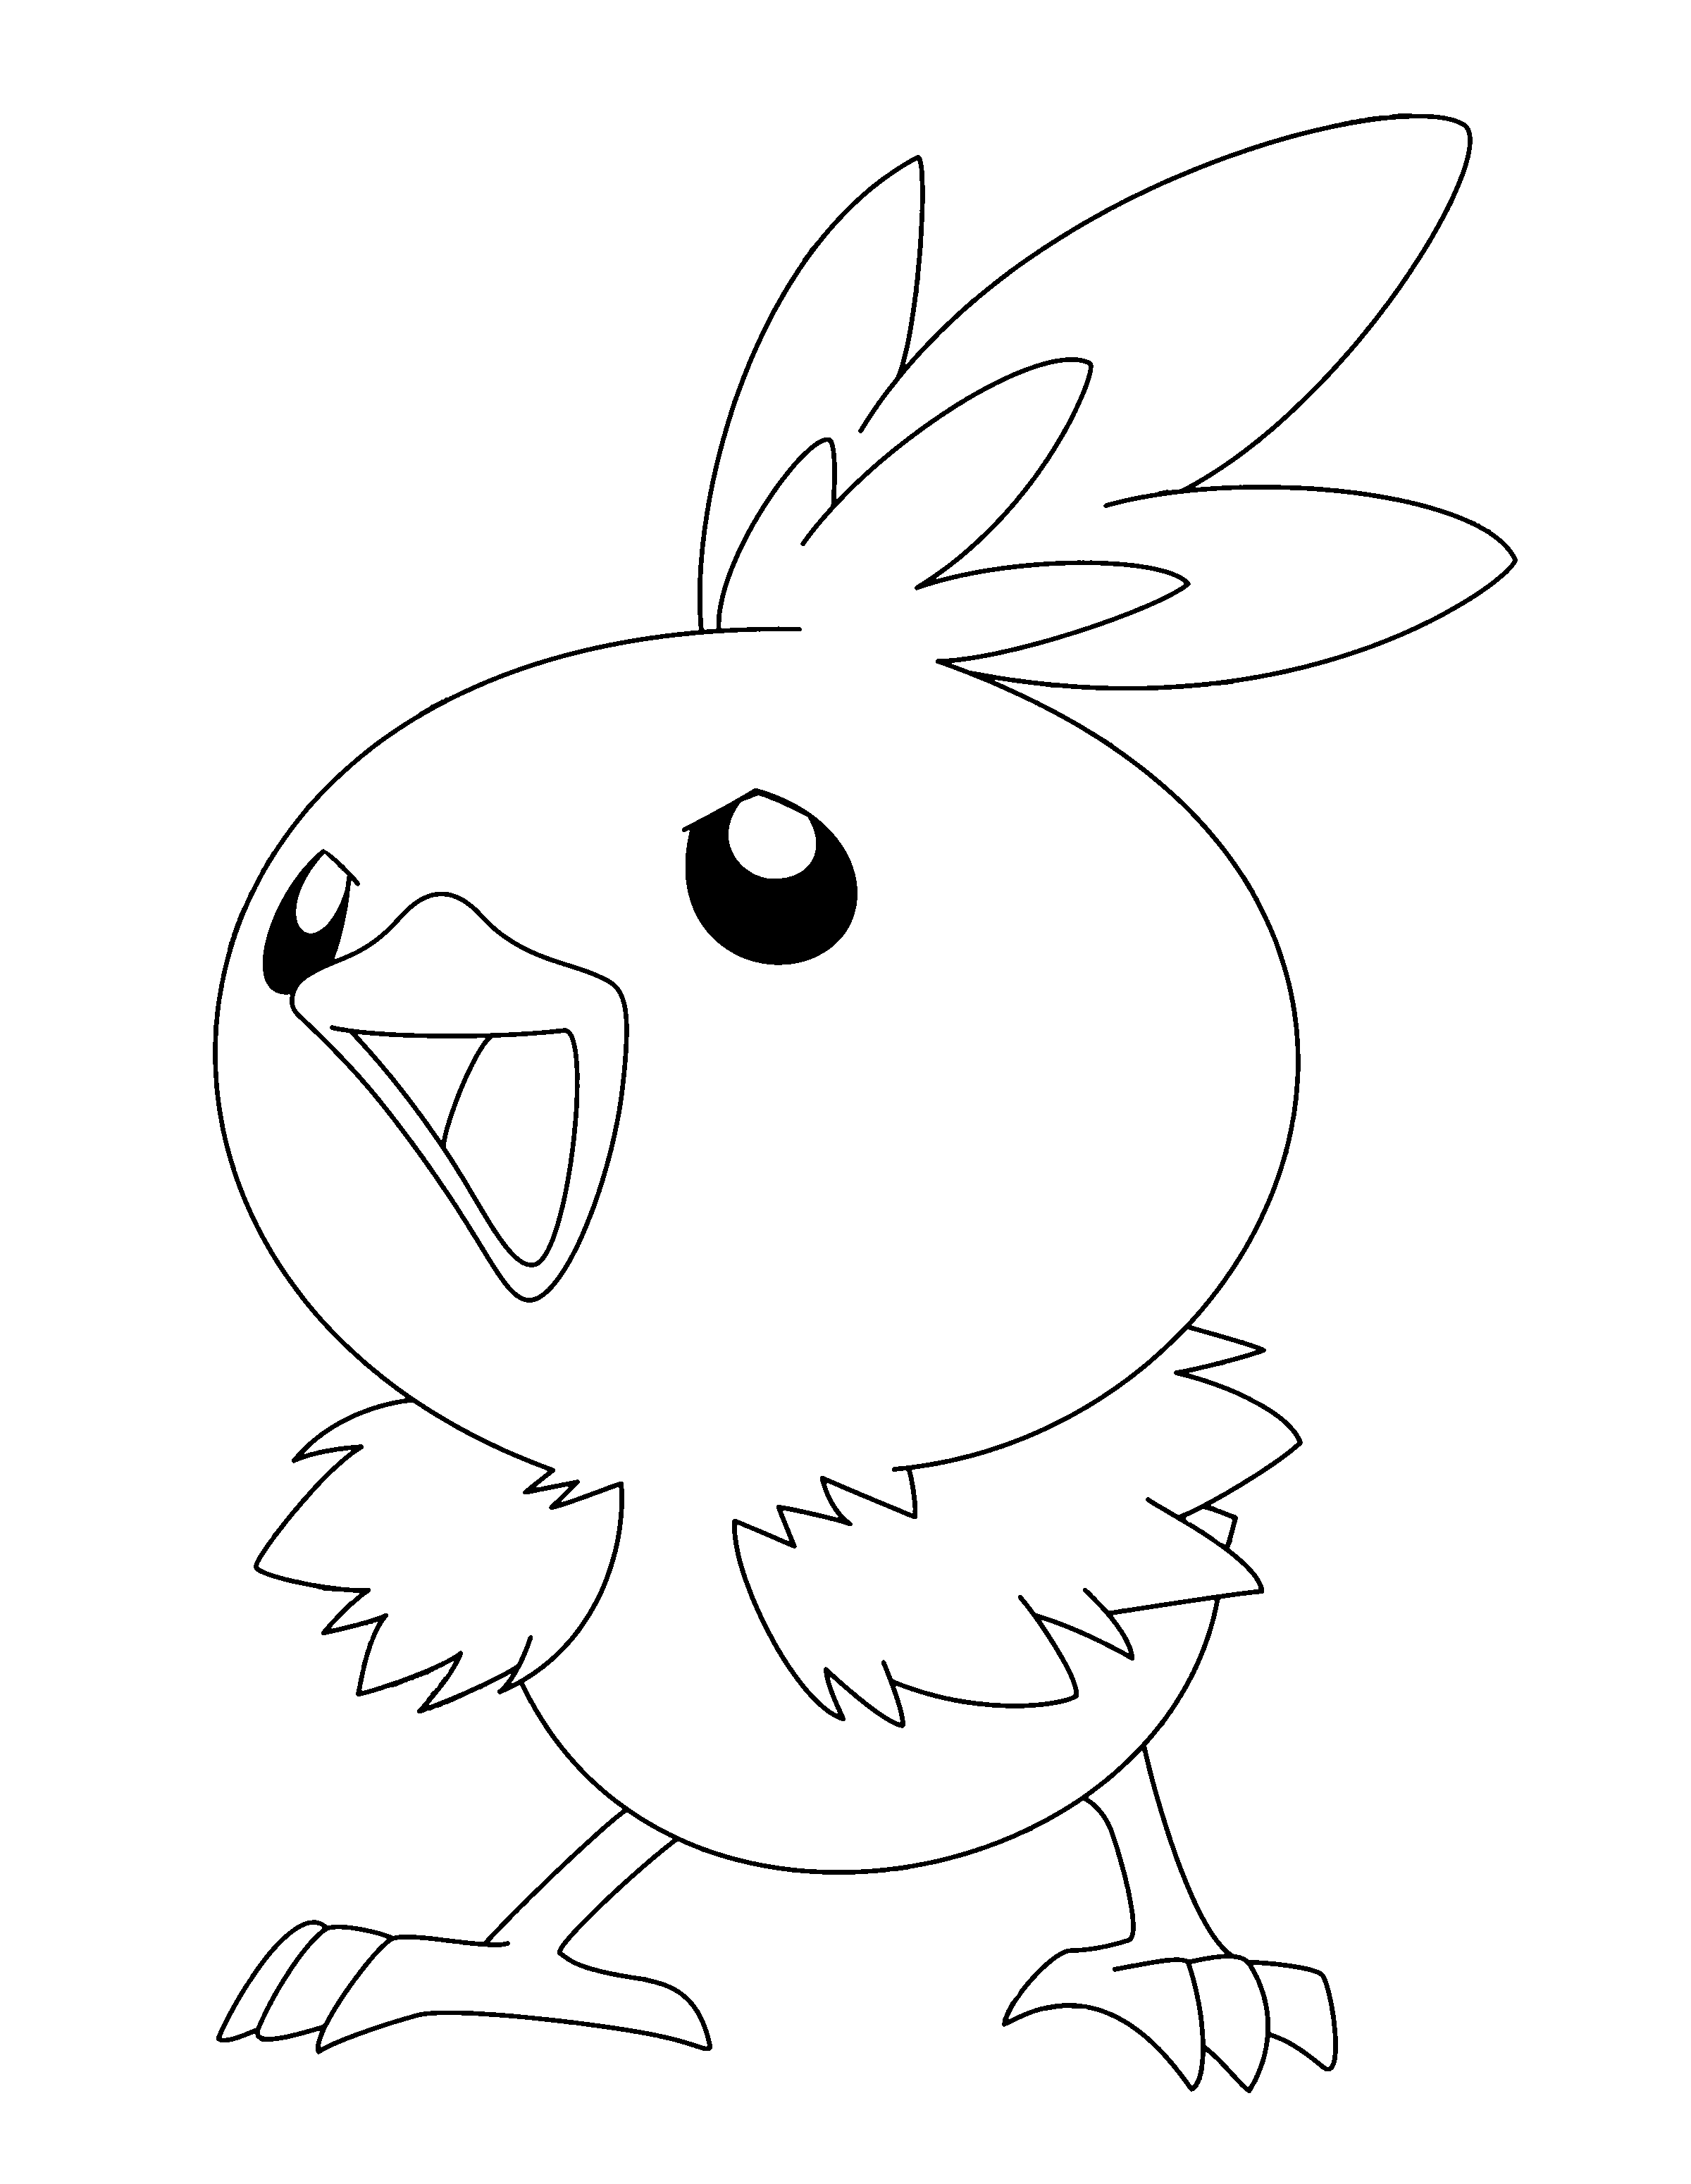 coloring-page-pokemon-coloring-pages-446